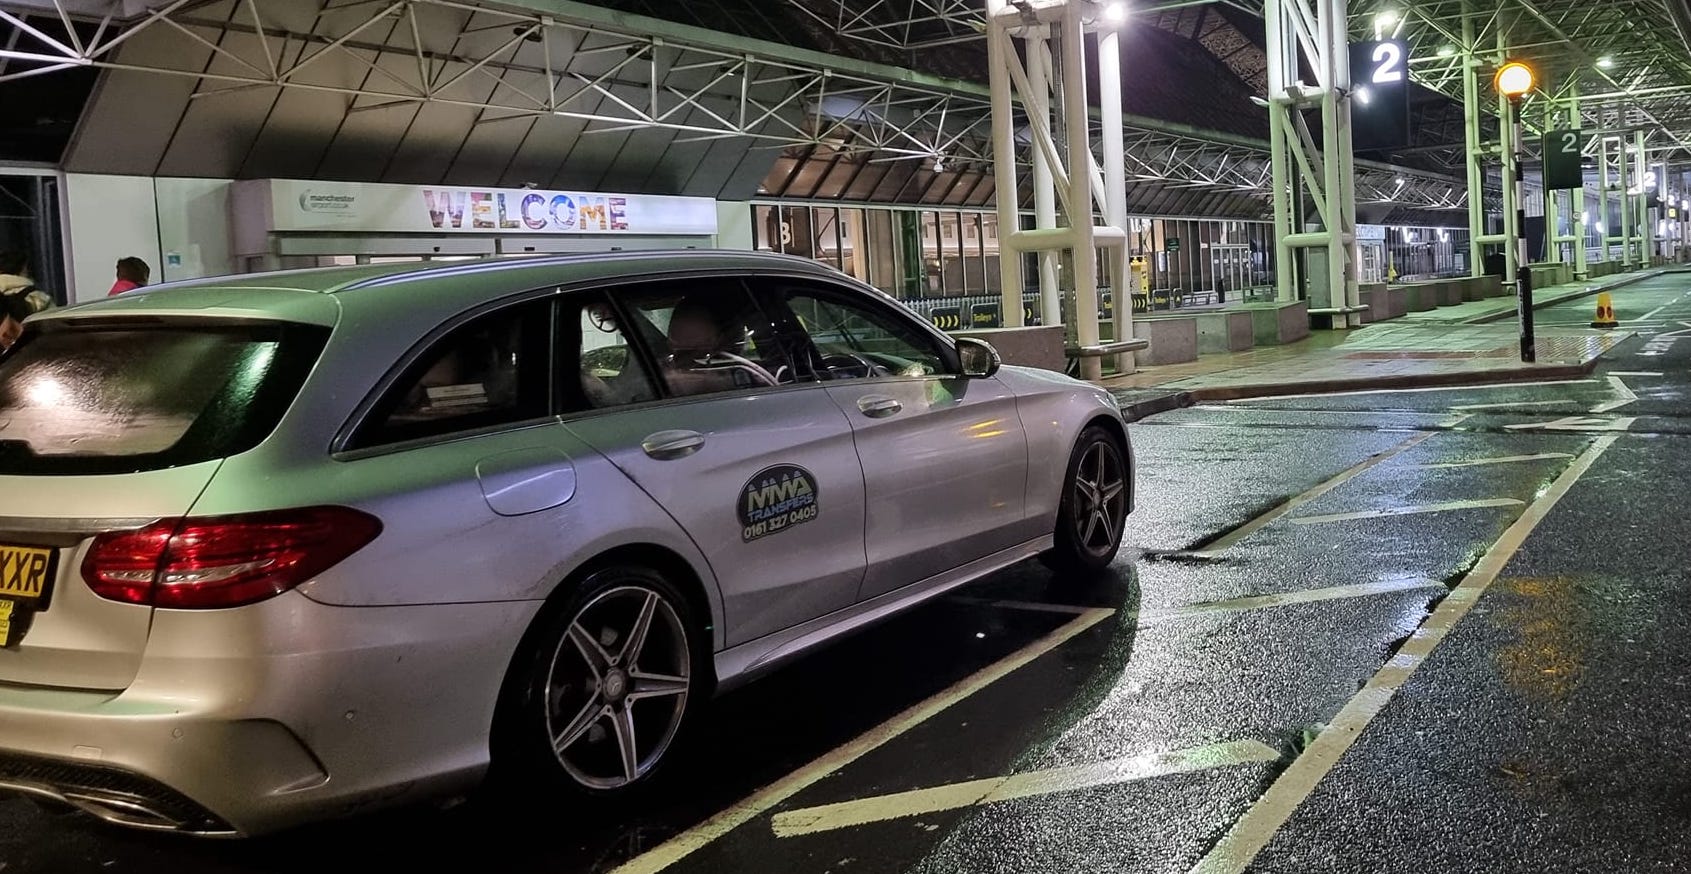 Take a Taxi from Manchester Airport to Abergele with a free Meet and Greet Service